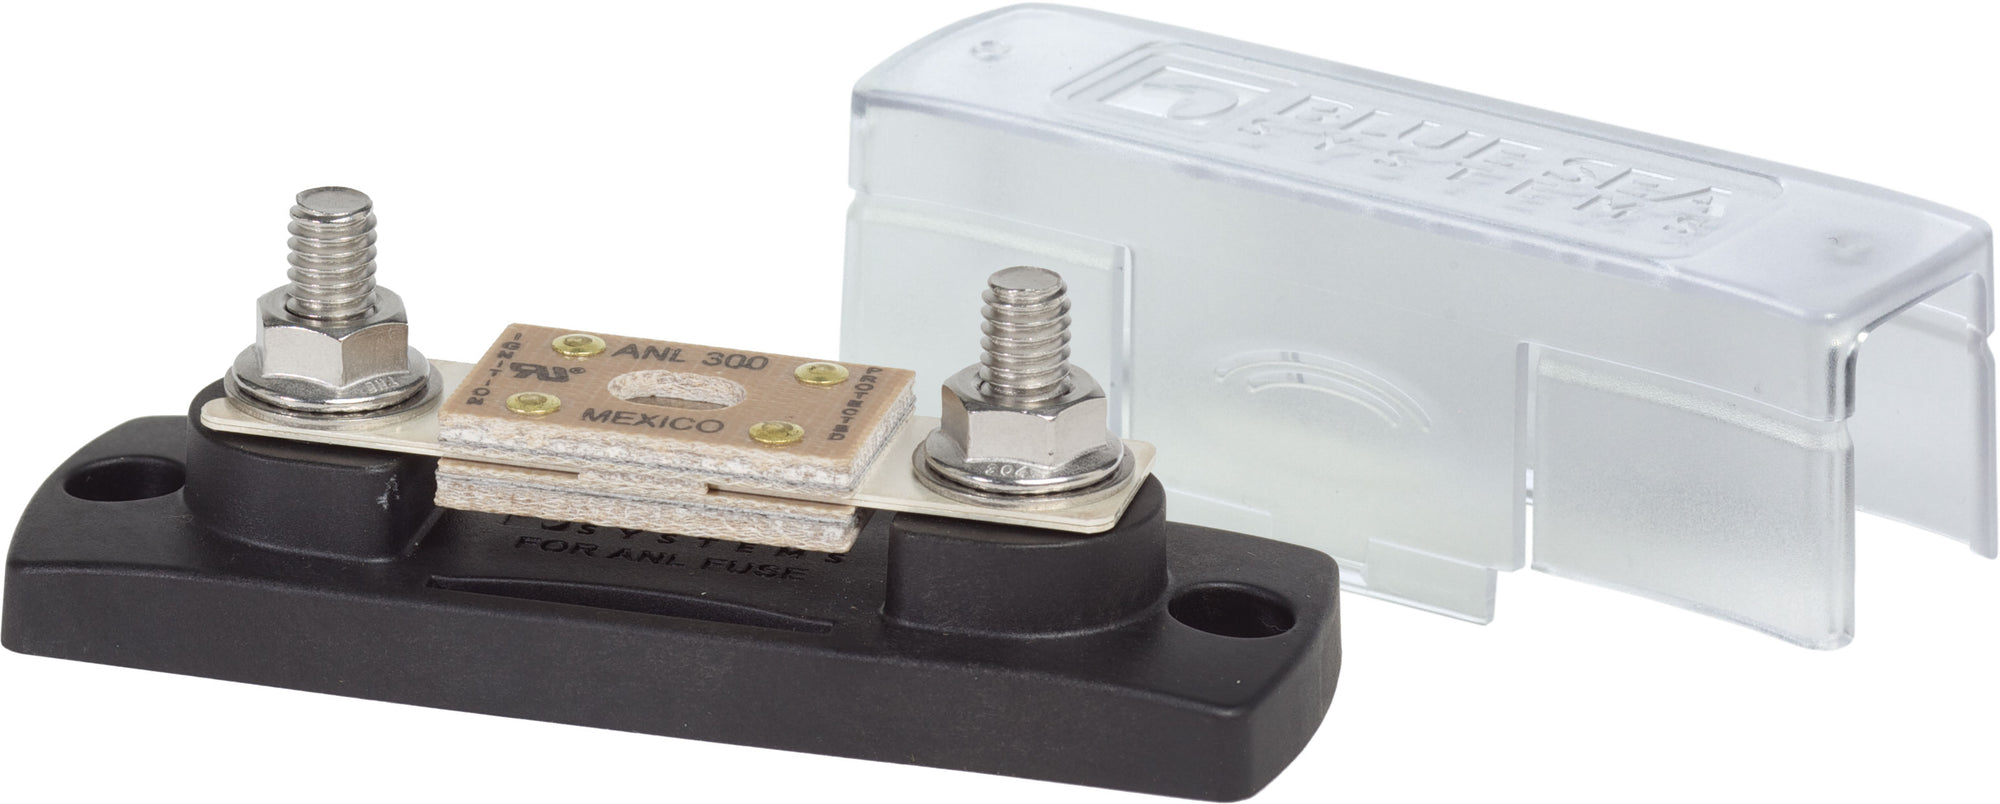 ANL Fuse Block with Insulating Cover - 35 to 300A